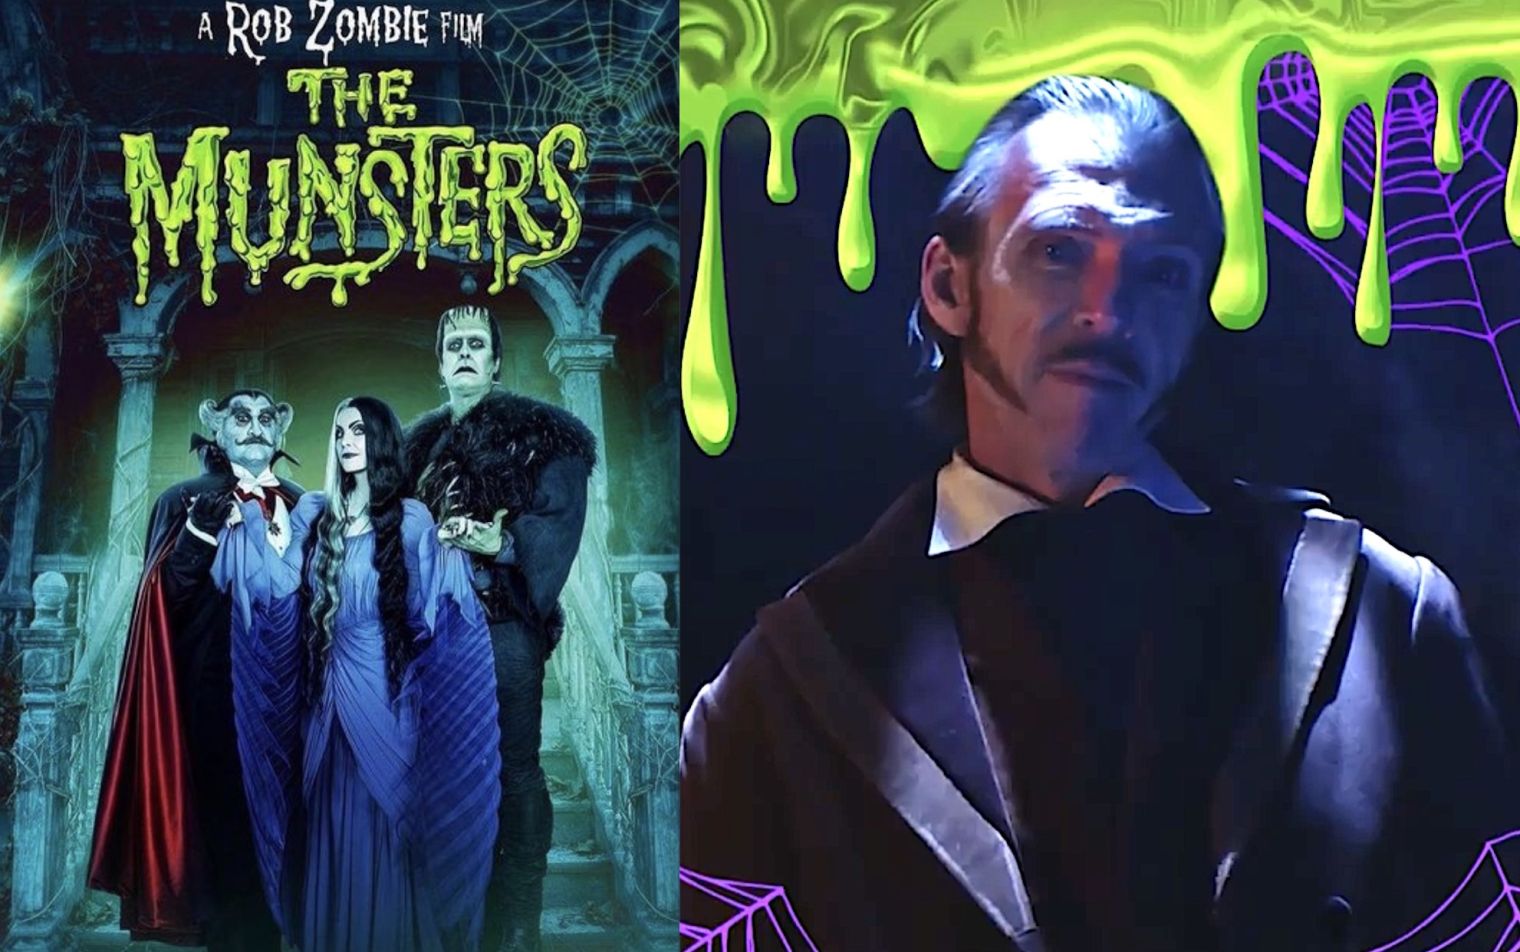 Richard Brake stars as Dr Henry Augustus Wolfgang in Rob Zombie's ’The Munsters’ which is now available to stream in the UK. 